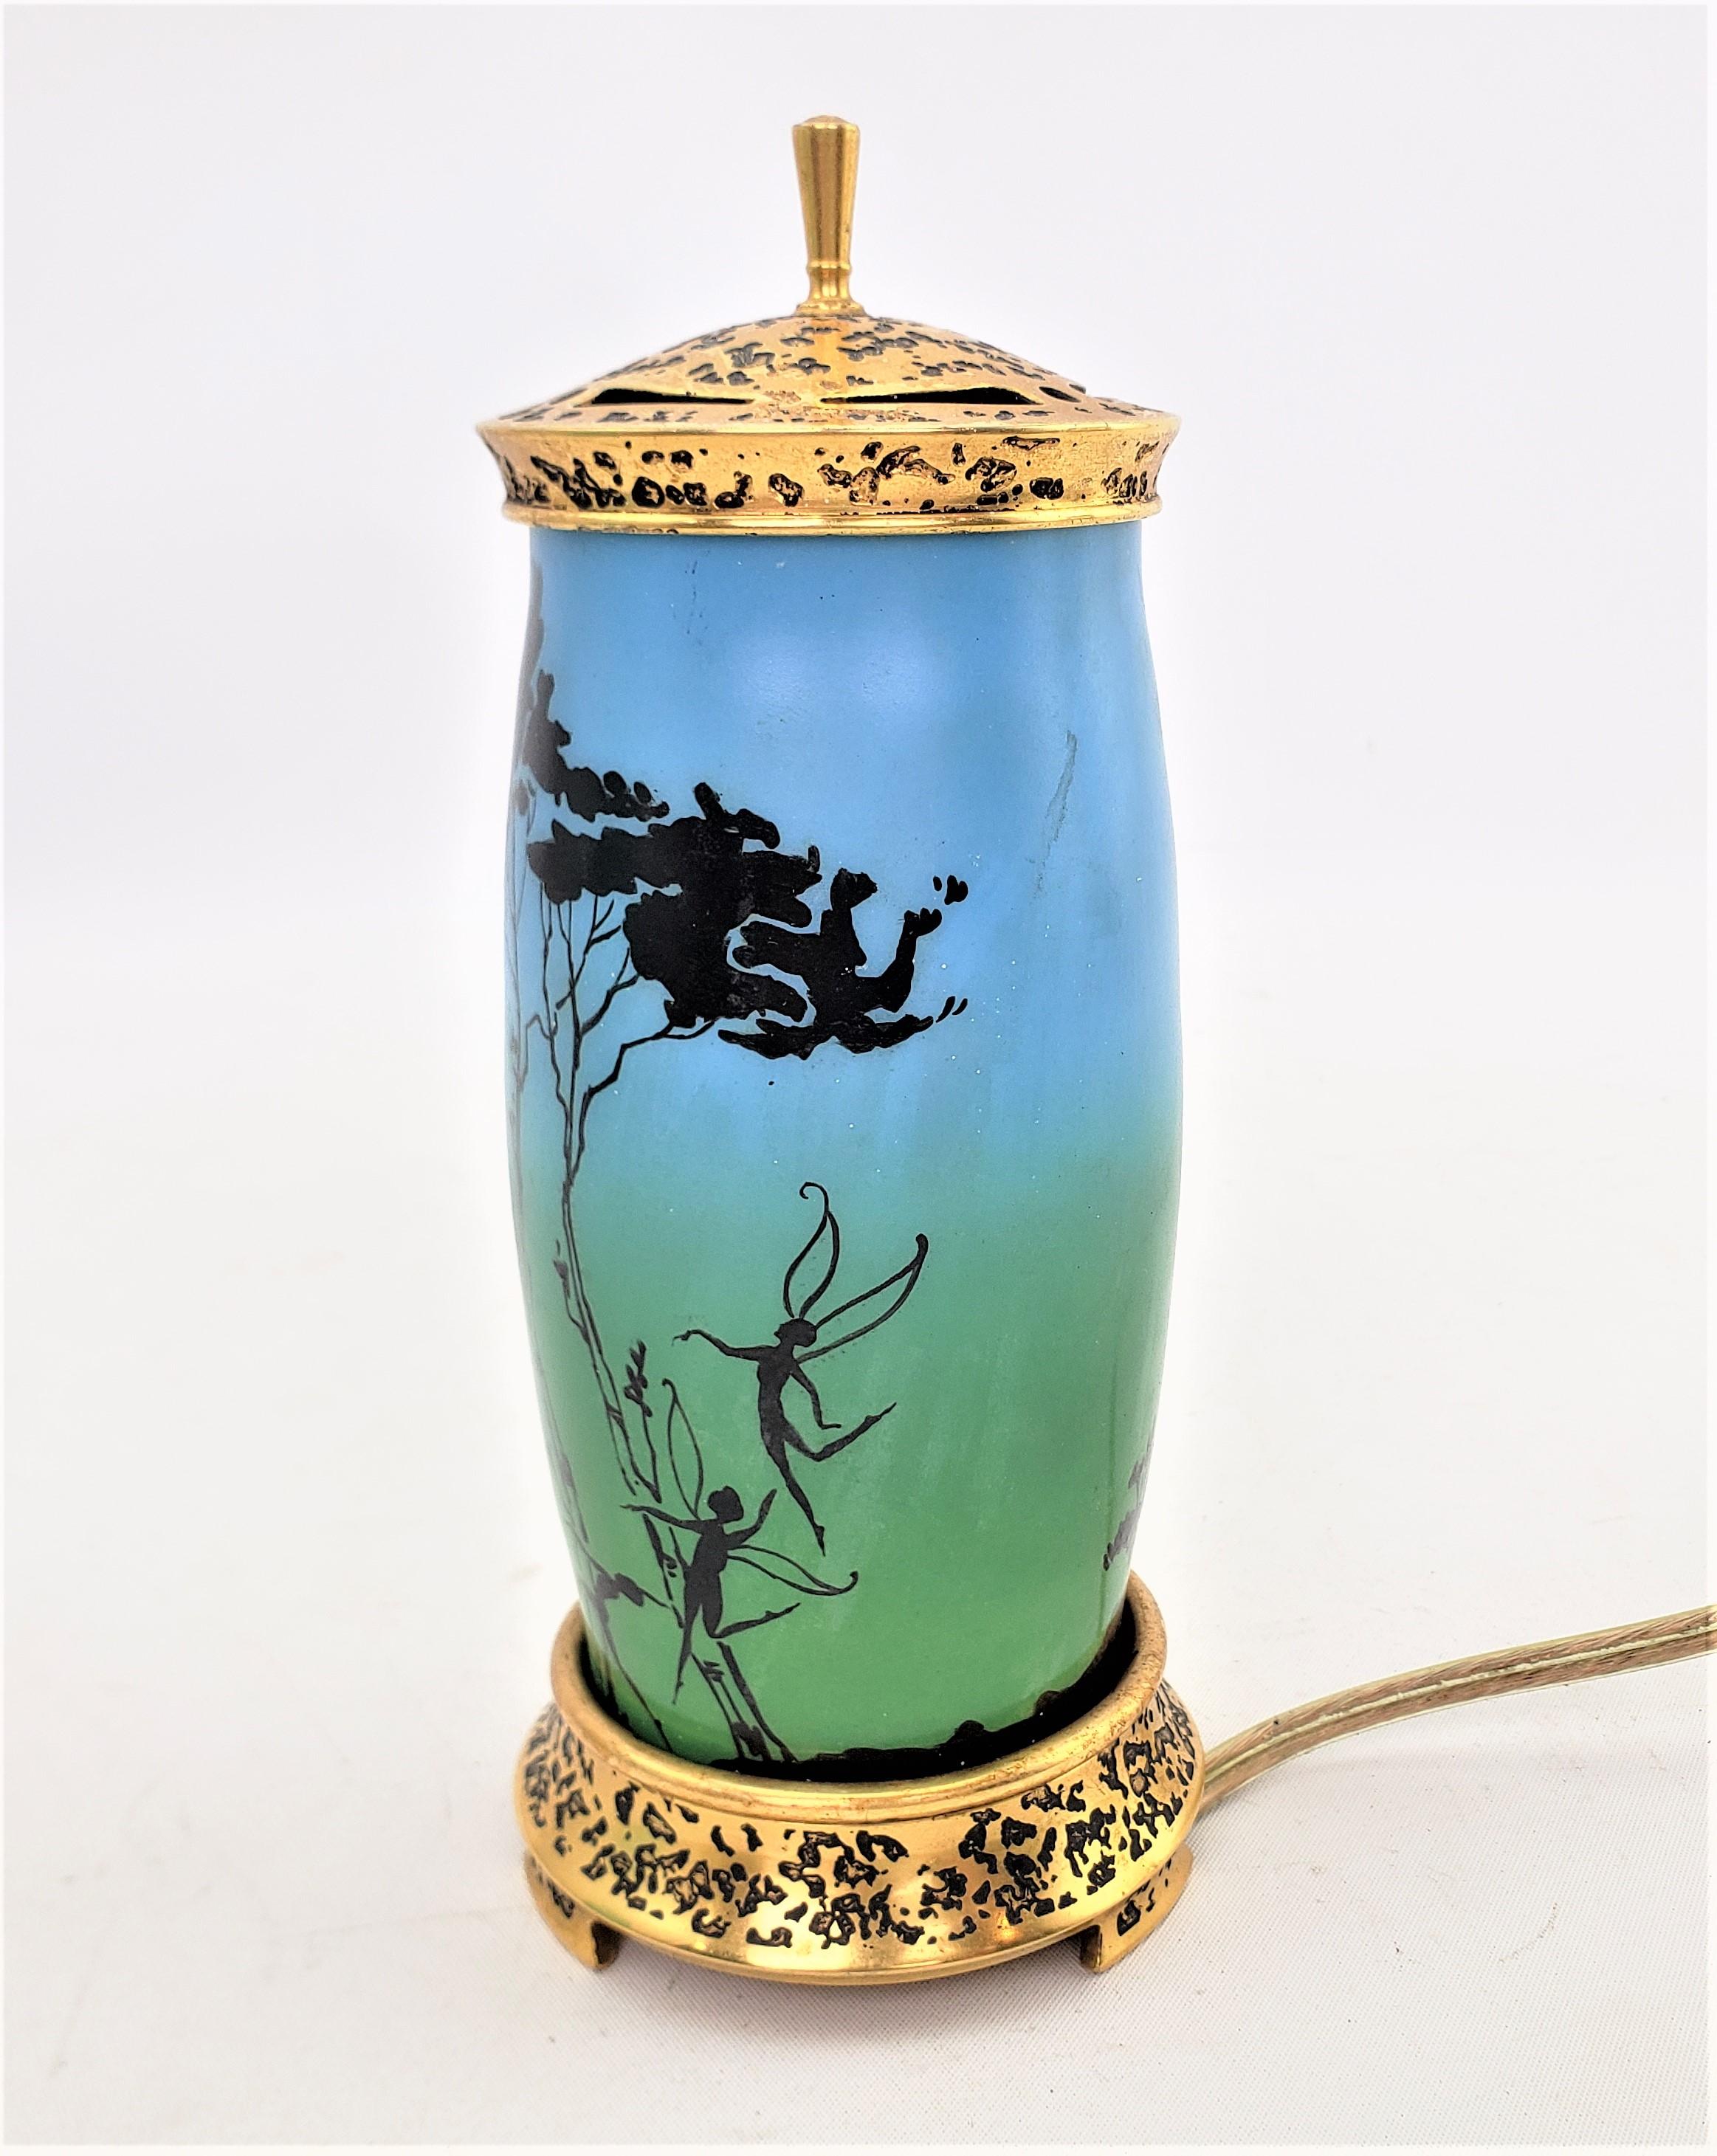 American Antique DeVilbiss Bronze & Enameled Art Glass Perfume Lamp with Dancing Pixies